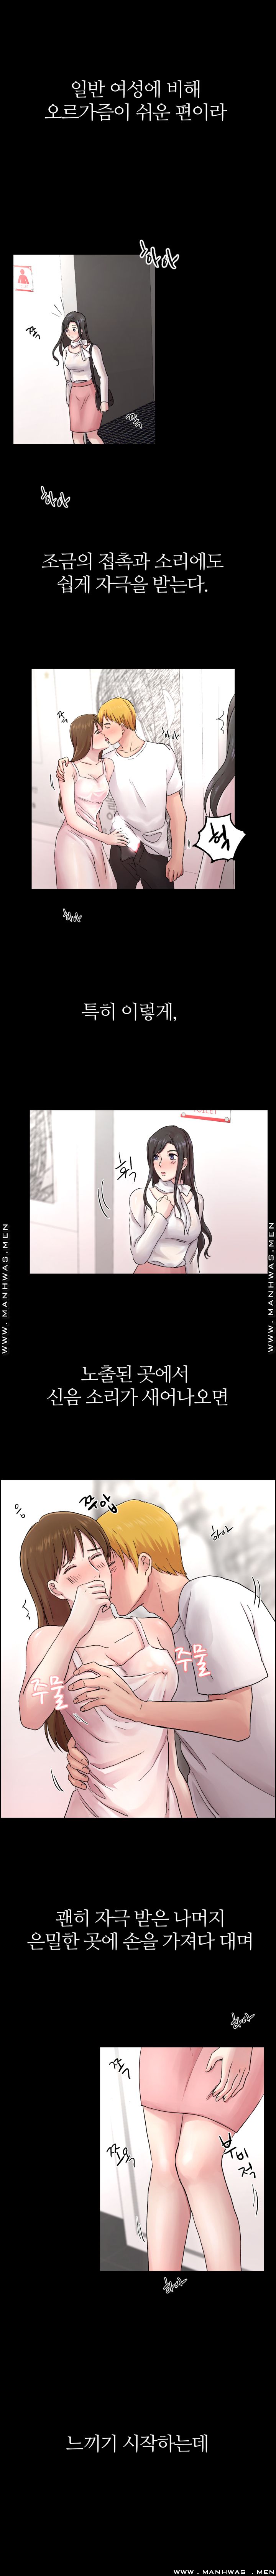 The Taste of Affair Raw - Chapter 1 Page 6